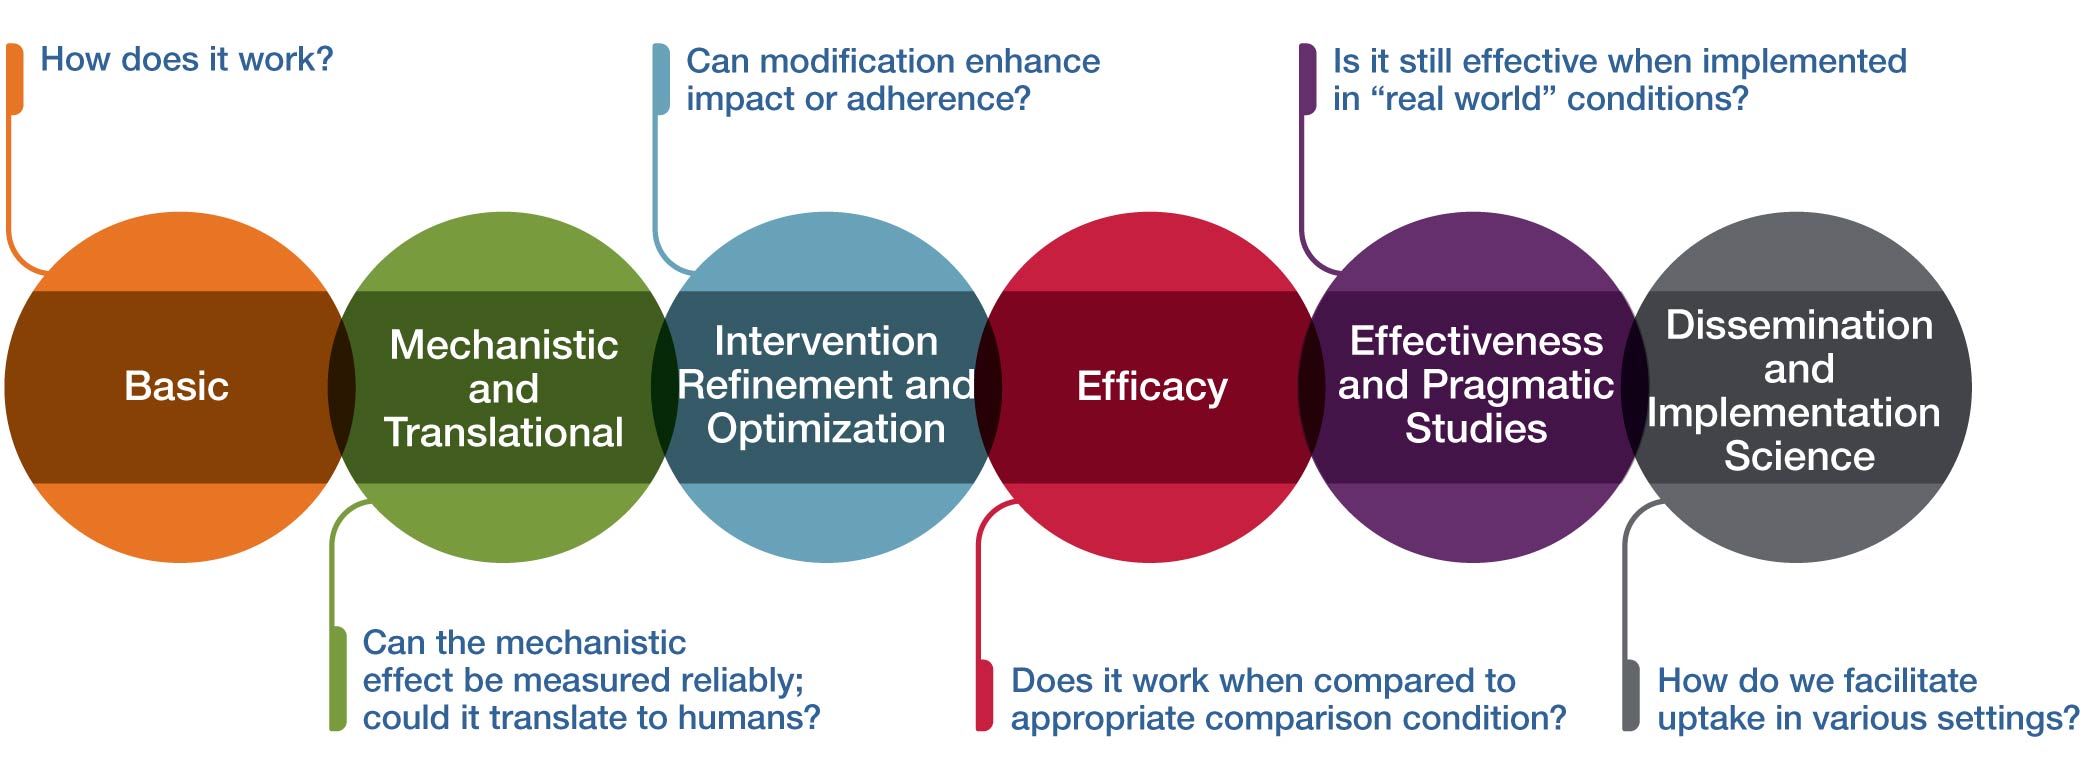 NCCIH Research Framework - Basic (How does it work?), Mechanistic and Translational (Can the mechanistic effect be measured reliably; could it translate to humans?), Intervention Refinement and Optimization (Can modification enhance impact or adherence?), Efficacy (Does it work when compared to appropriate comparison condition?), Effectiveness and Pragmatic Studies (Is it still effective when implemented in "real world" conditions?), Dissemination and Implementation Science (How do we facilitate uptake in various settings?)